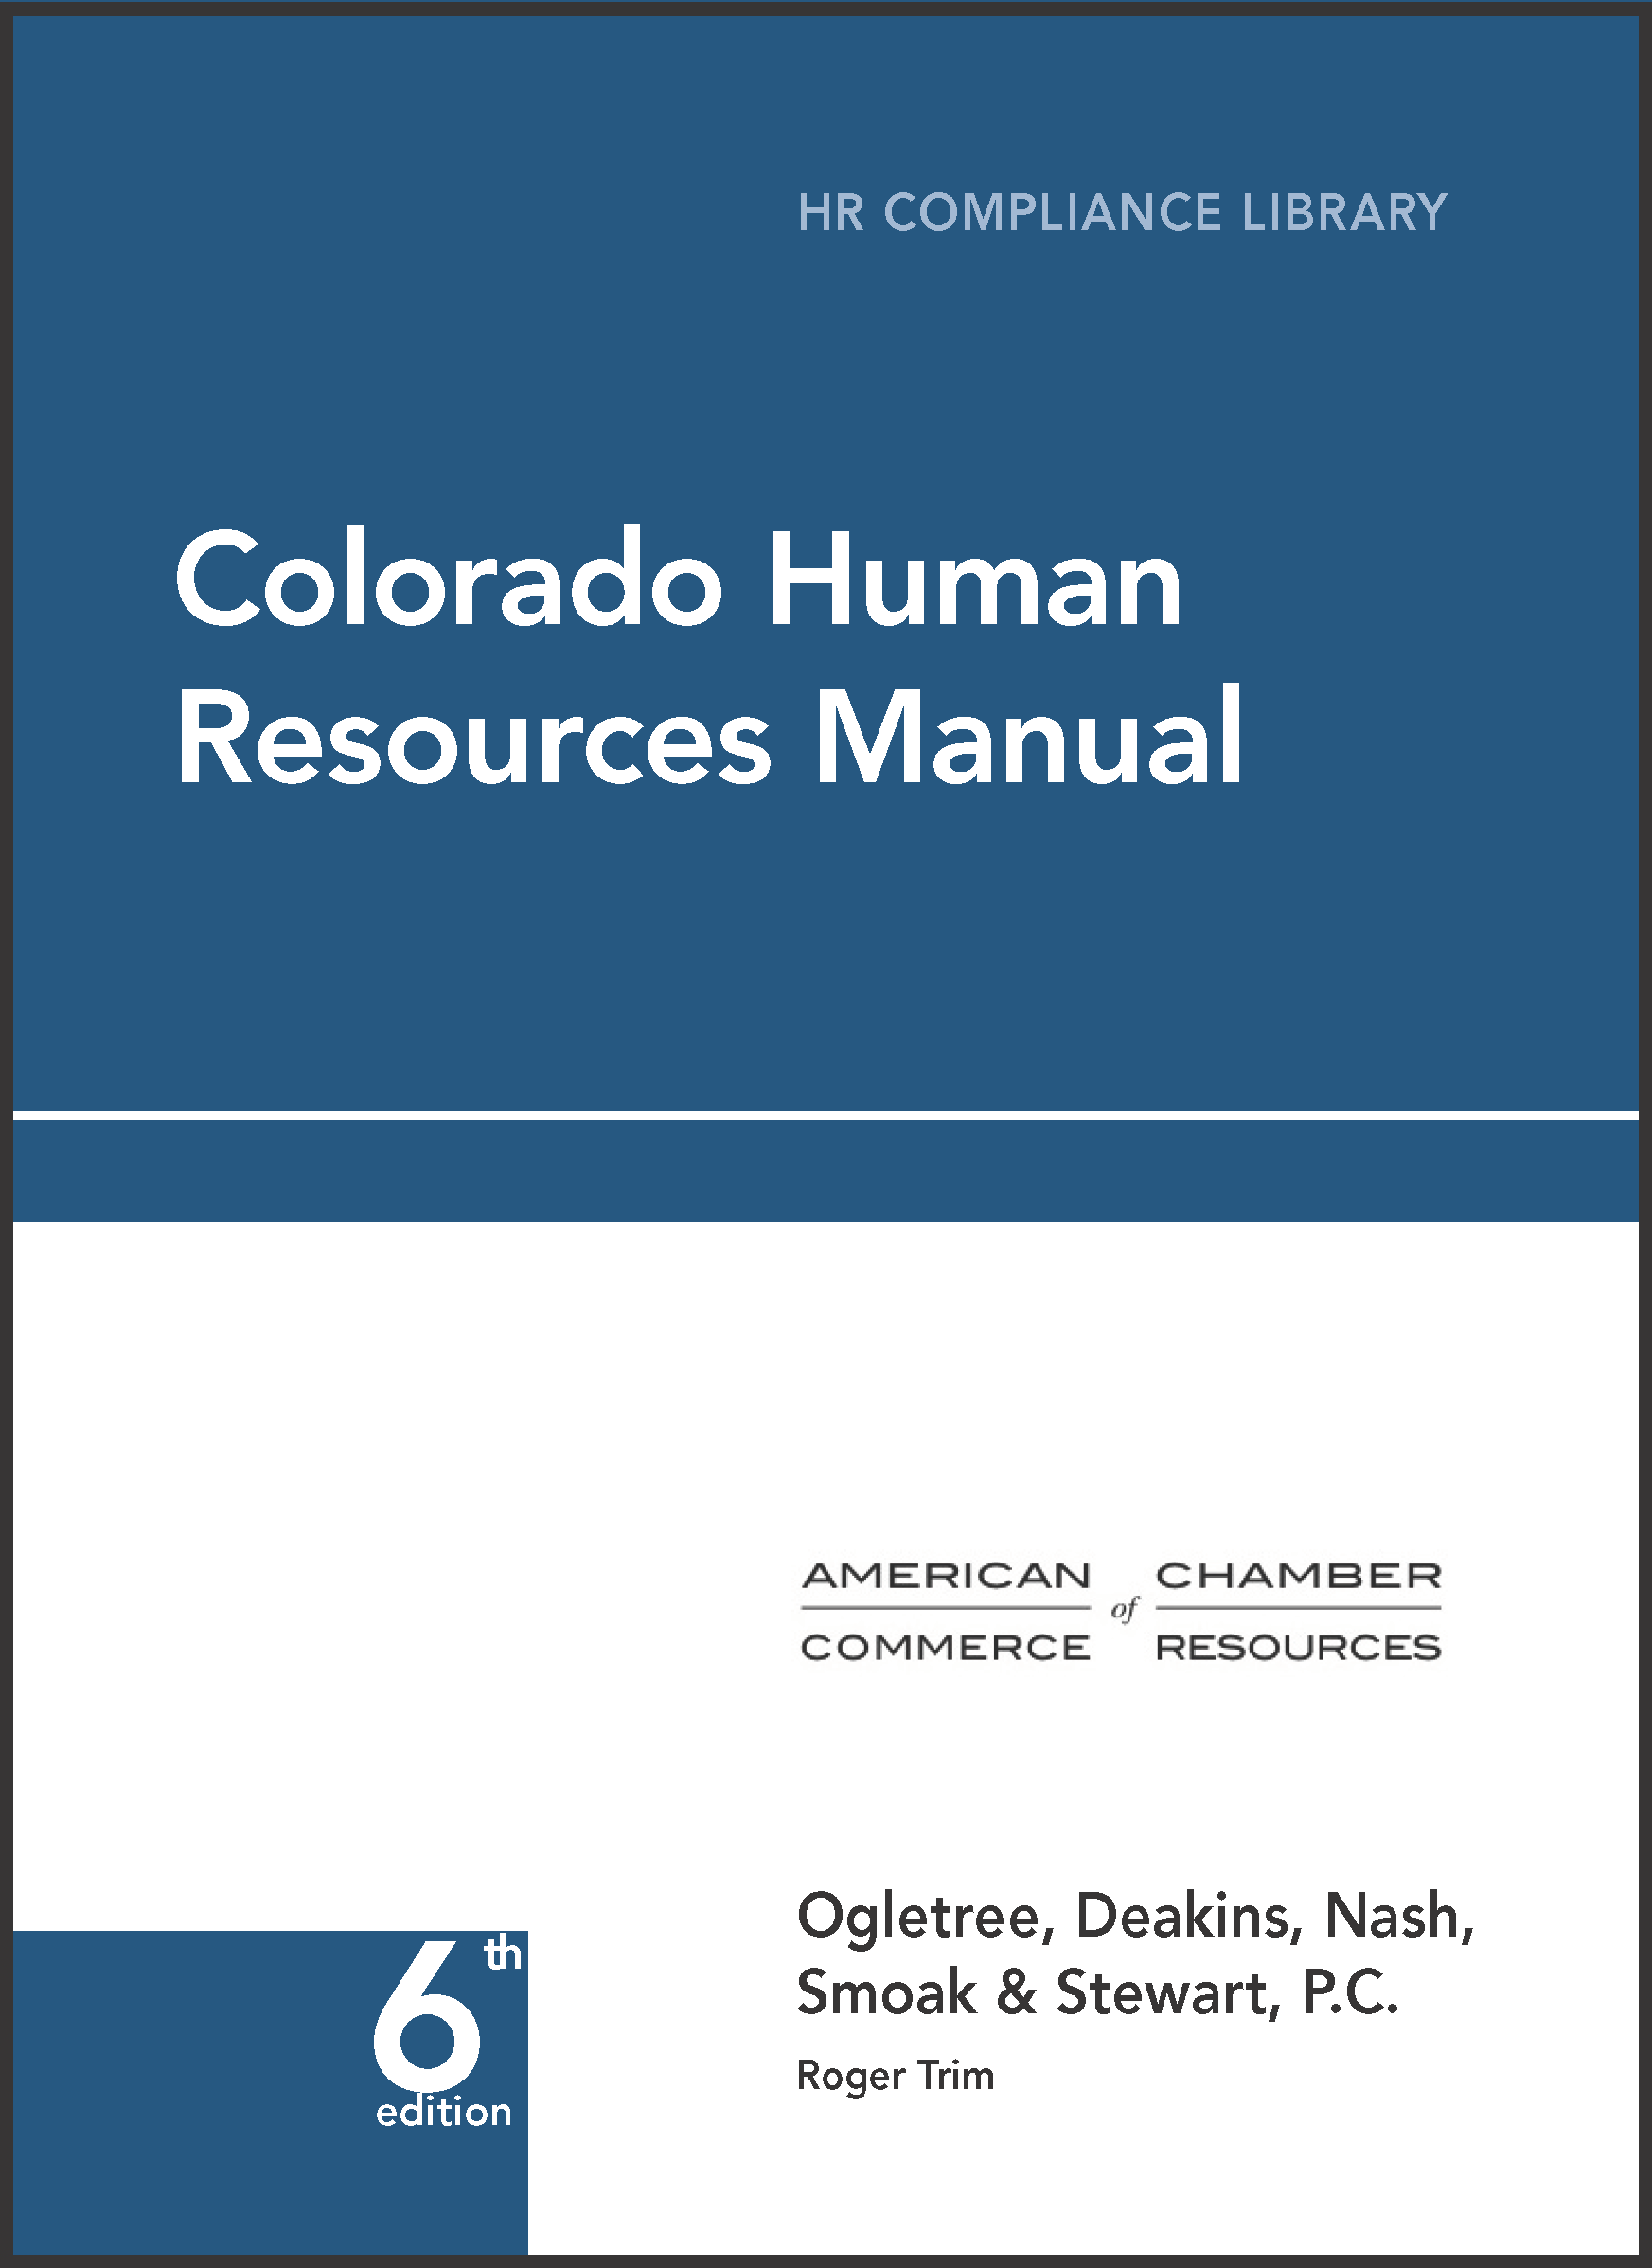 Colorado Human Resources Library  employment law image, remote work, labor laws, employment laws, right to work, order of protection, minimum wage